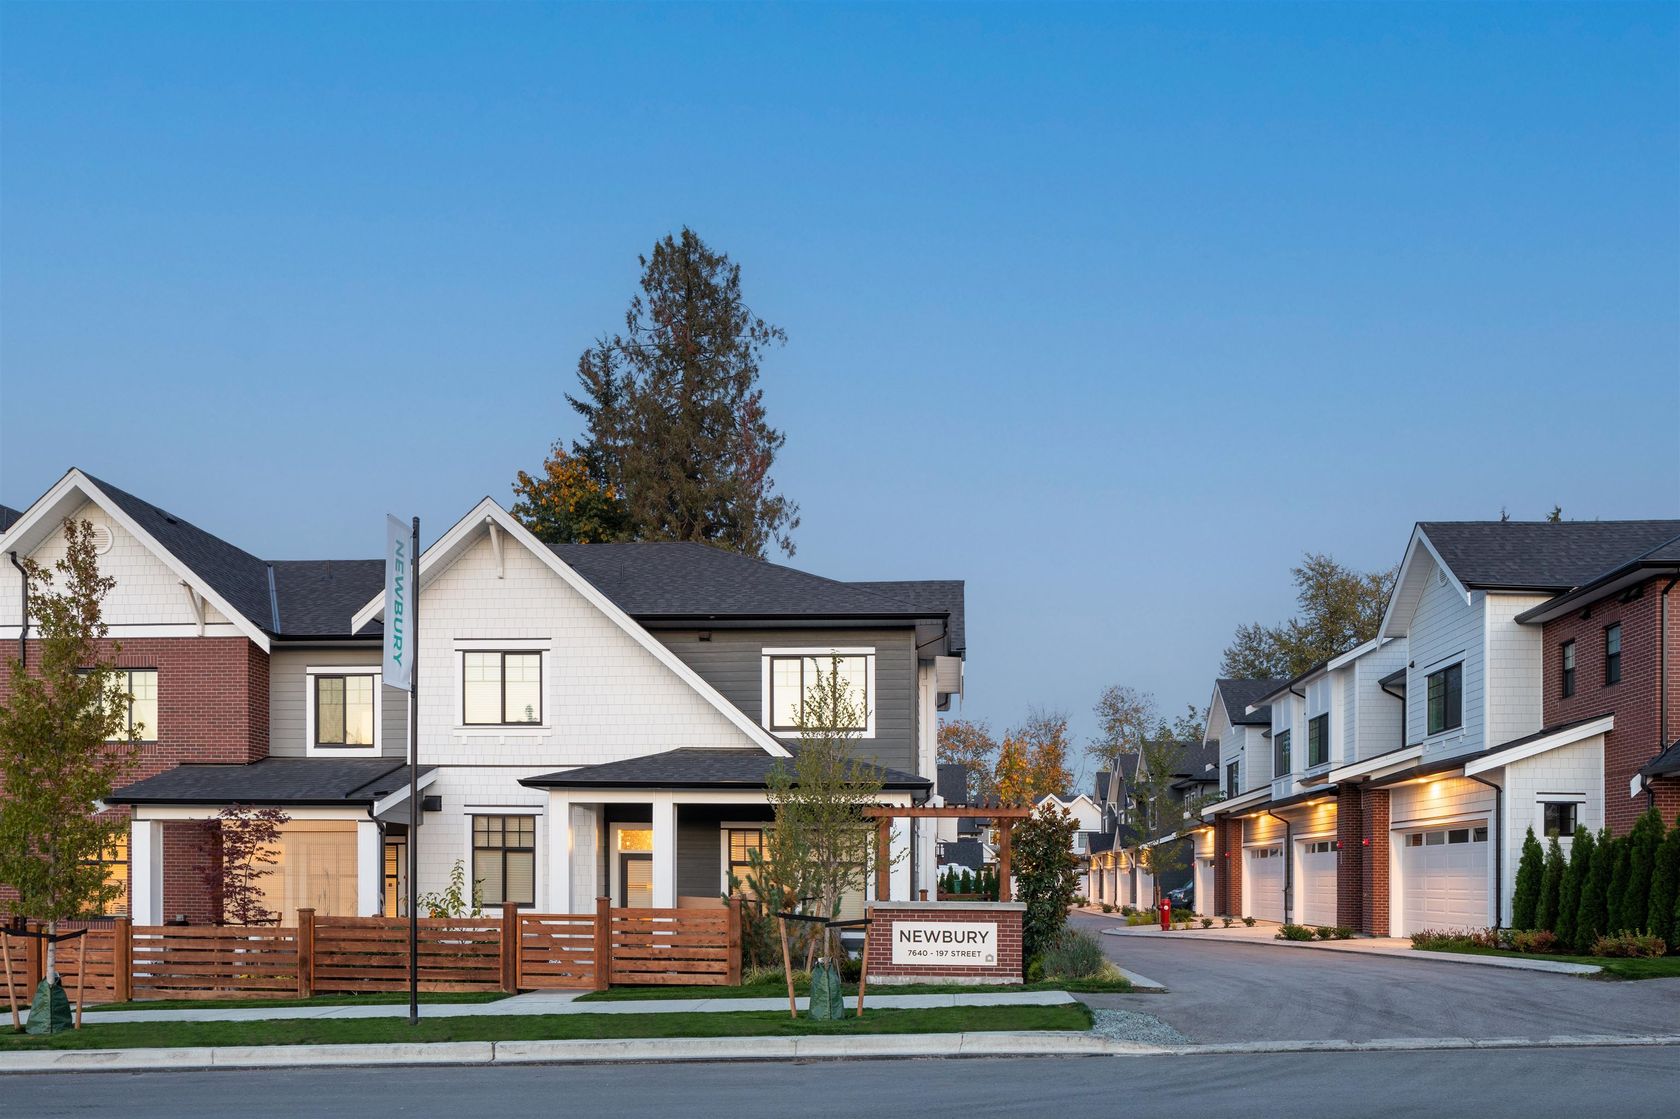 Newbury is a new development project at the heart of West Village in Langley